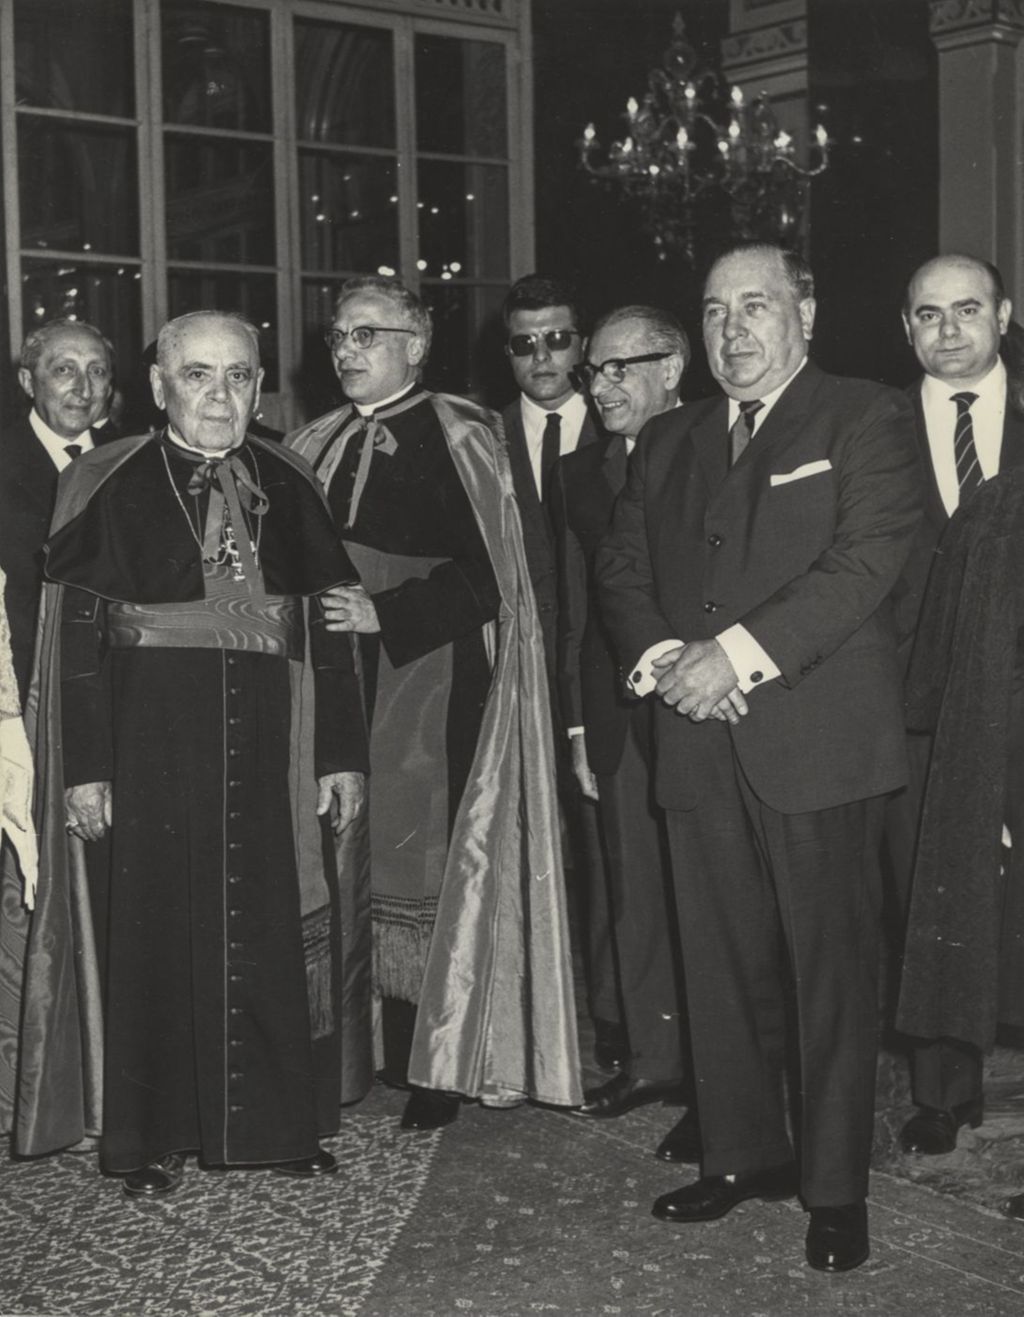 Miniature of Richard J. Daley, Colonel Frank Chesrow and clerics at reception in Rome